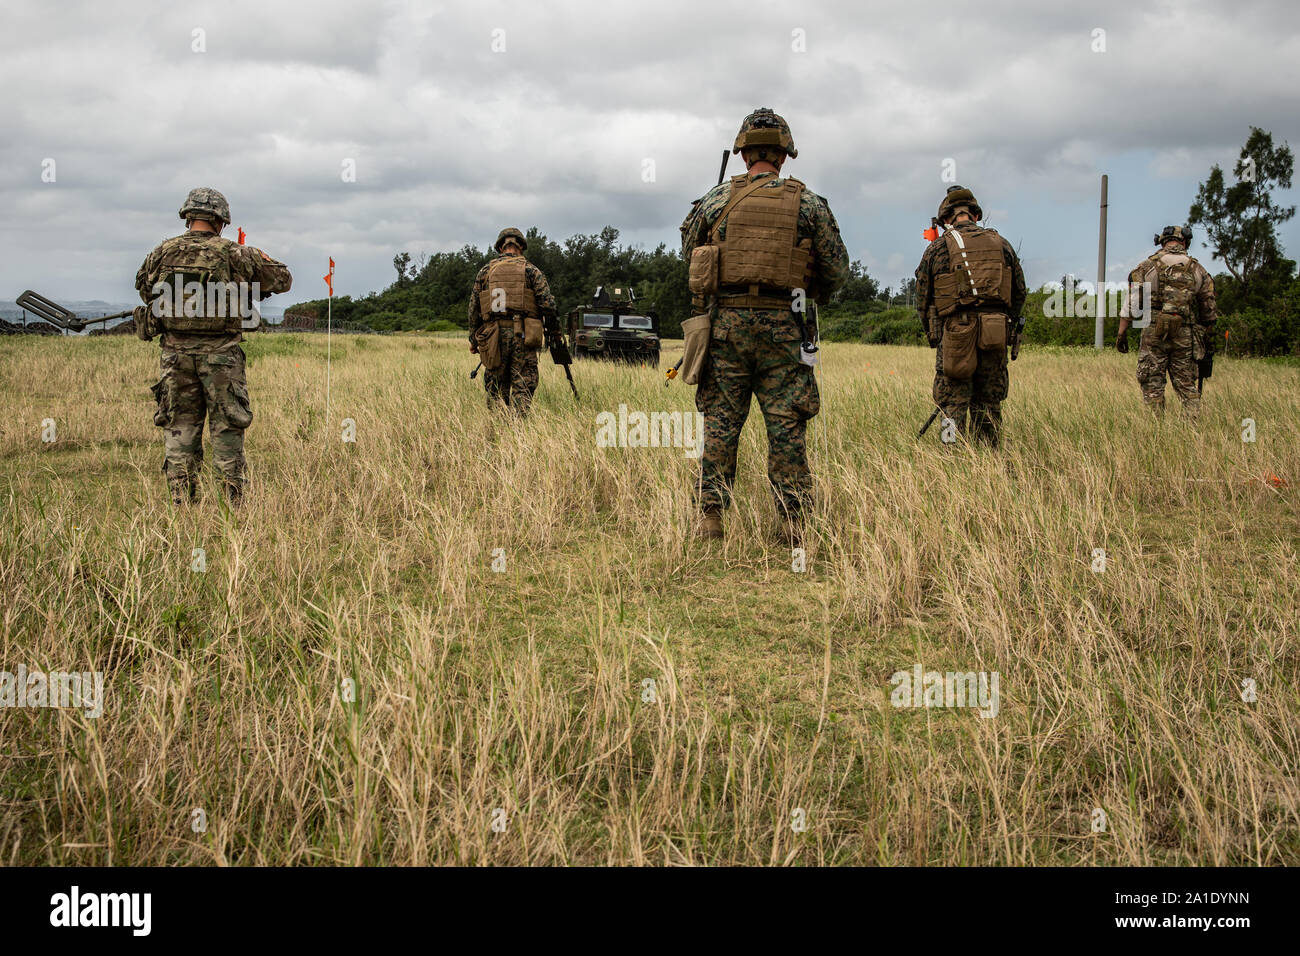 U.S. service members sweep for land mines during an explosive ordnance disposal exercise at Kin Blue Training Area, Okinawa, Japan, Sept. 19, 2019.  The EOD exercise was designed to simulate conventional warfare and the use of conventional ordnance and involved the participation of three U.S. military branches and over 43 different military occupational specialties within III Marine Expeditionary Force. (U.S. Marine Corps photo by Lance Cpl. Carla Elizabeth O) Stock Photo